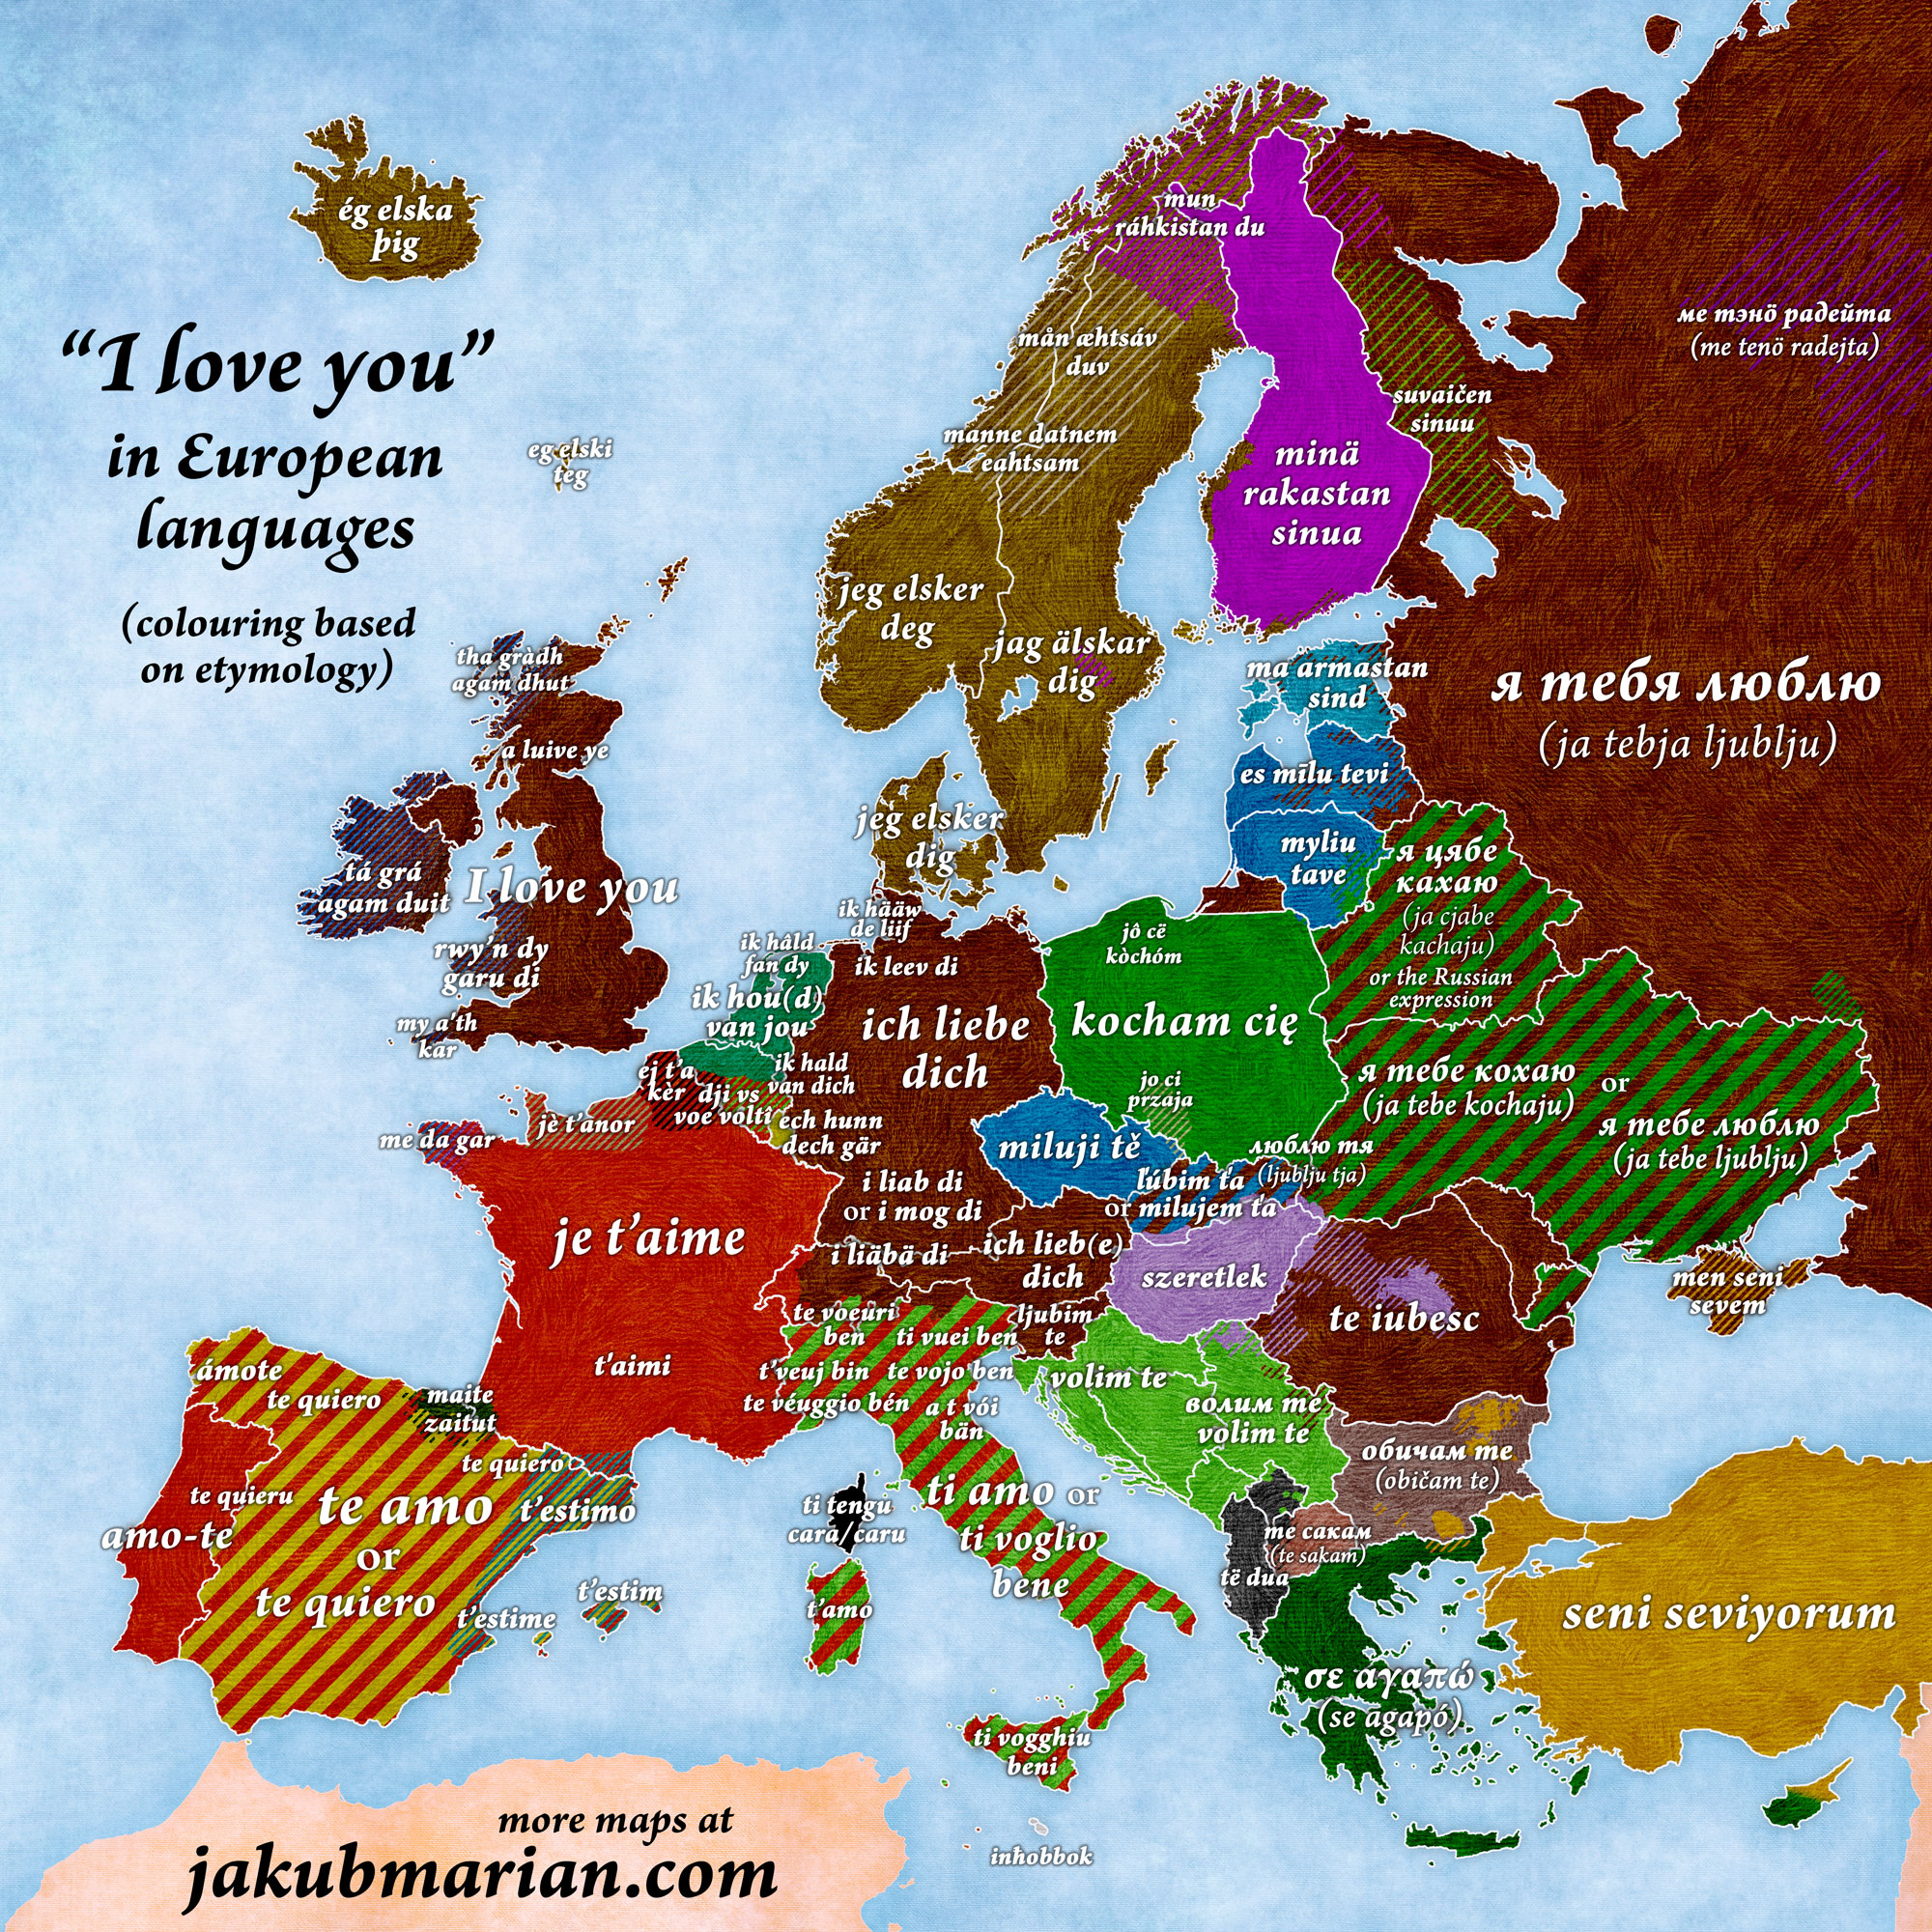 A map of "I love you" in various European languages